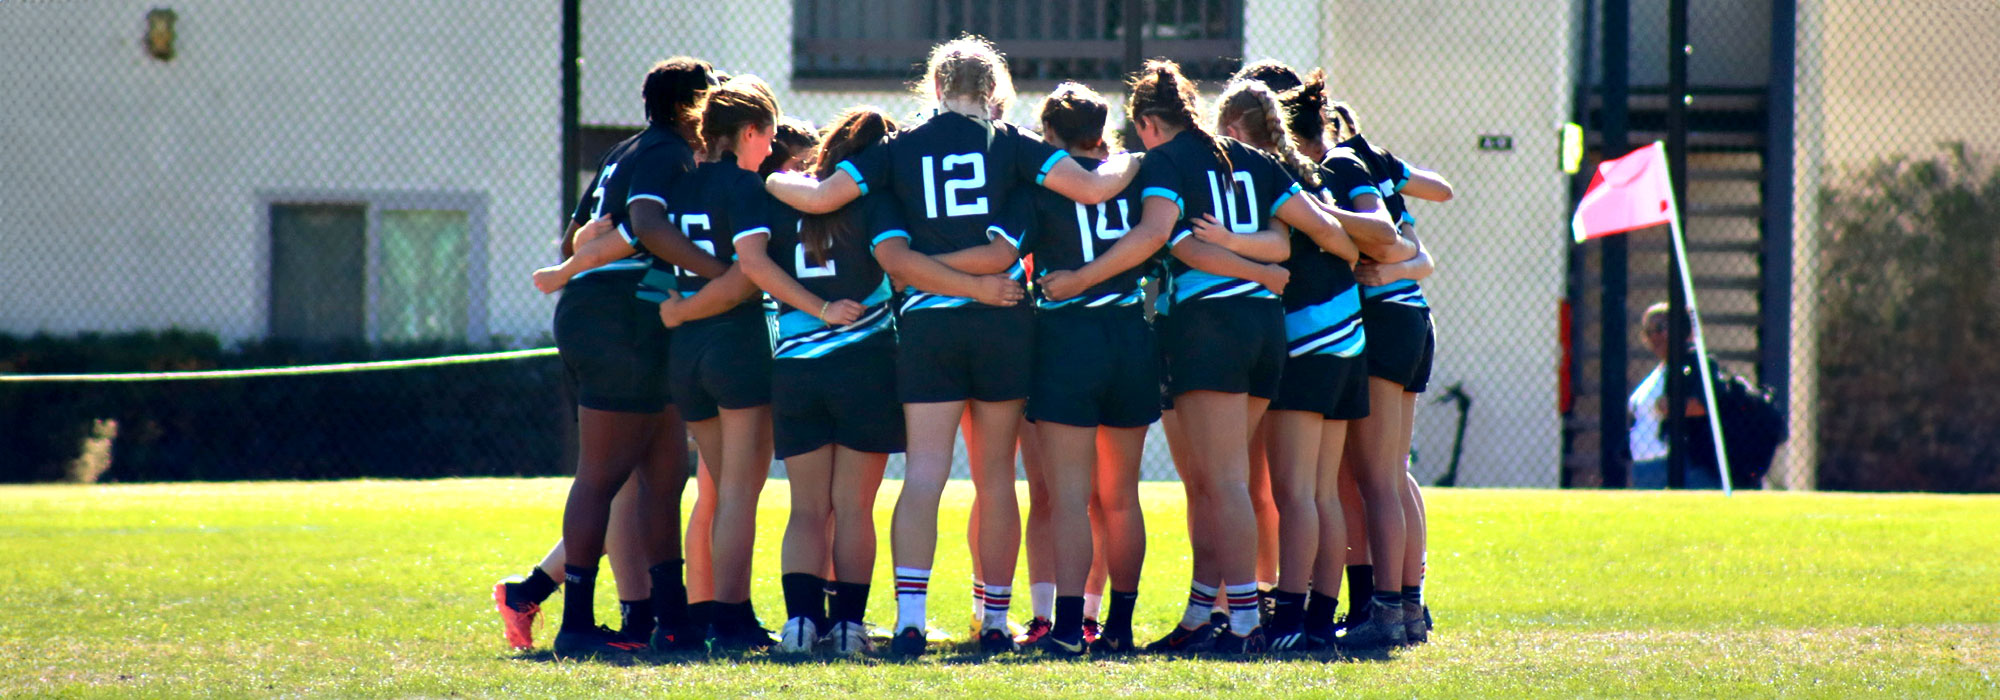 About The Womens Rugby Club Sport Clubs Aztec Recreation As San Diego State University 8187